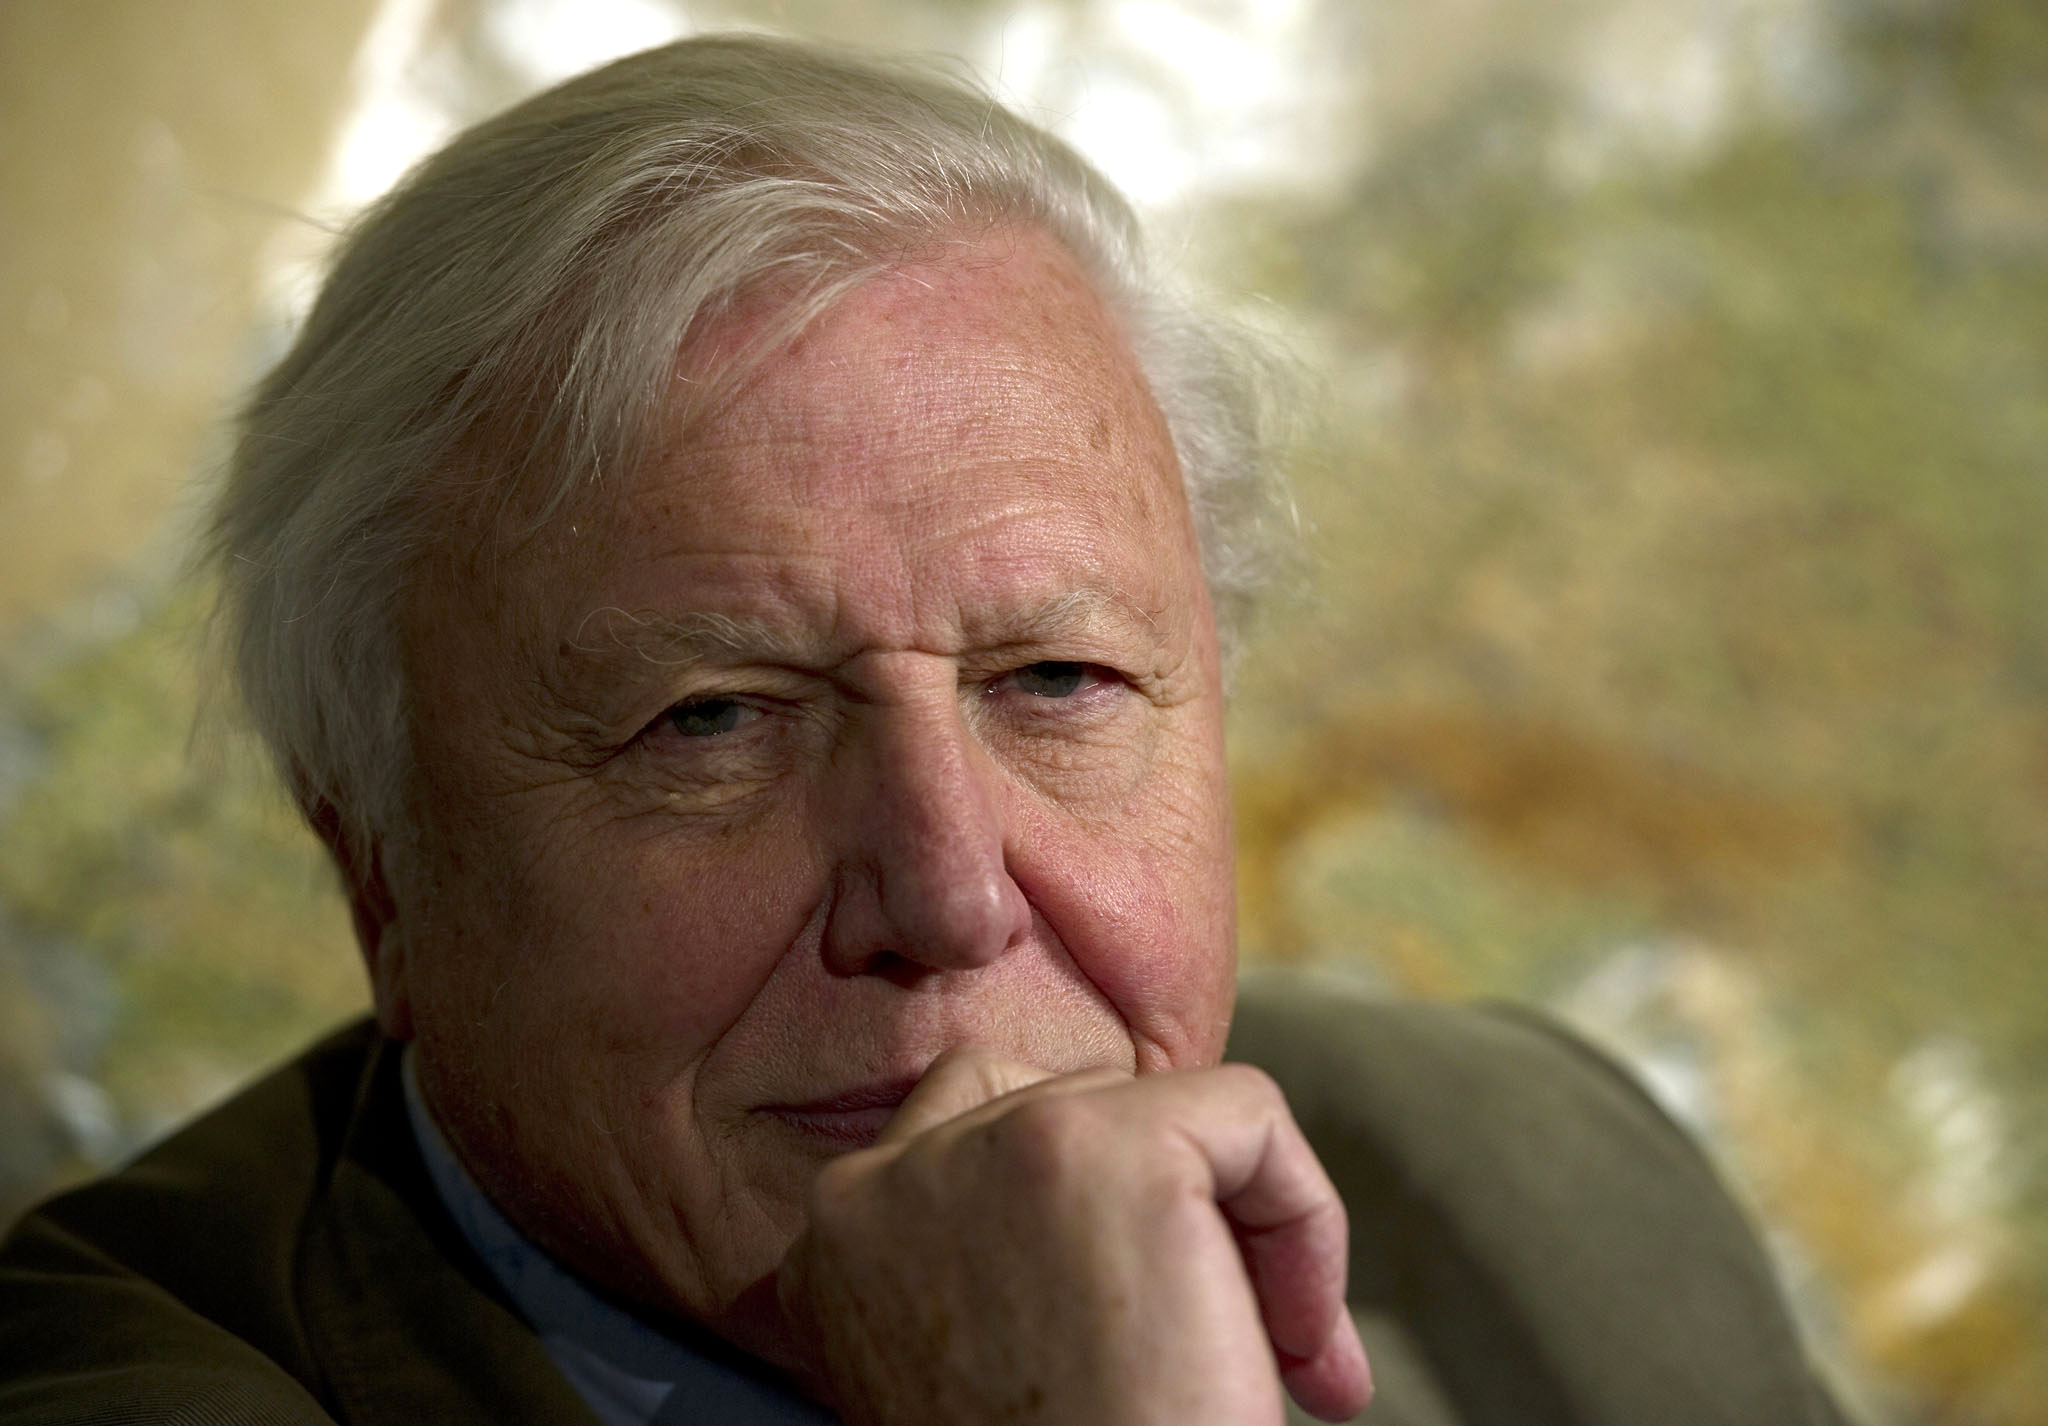 David Attenborough has been voted the nation's most trustworthy individual